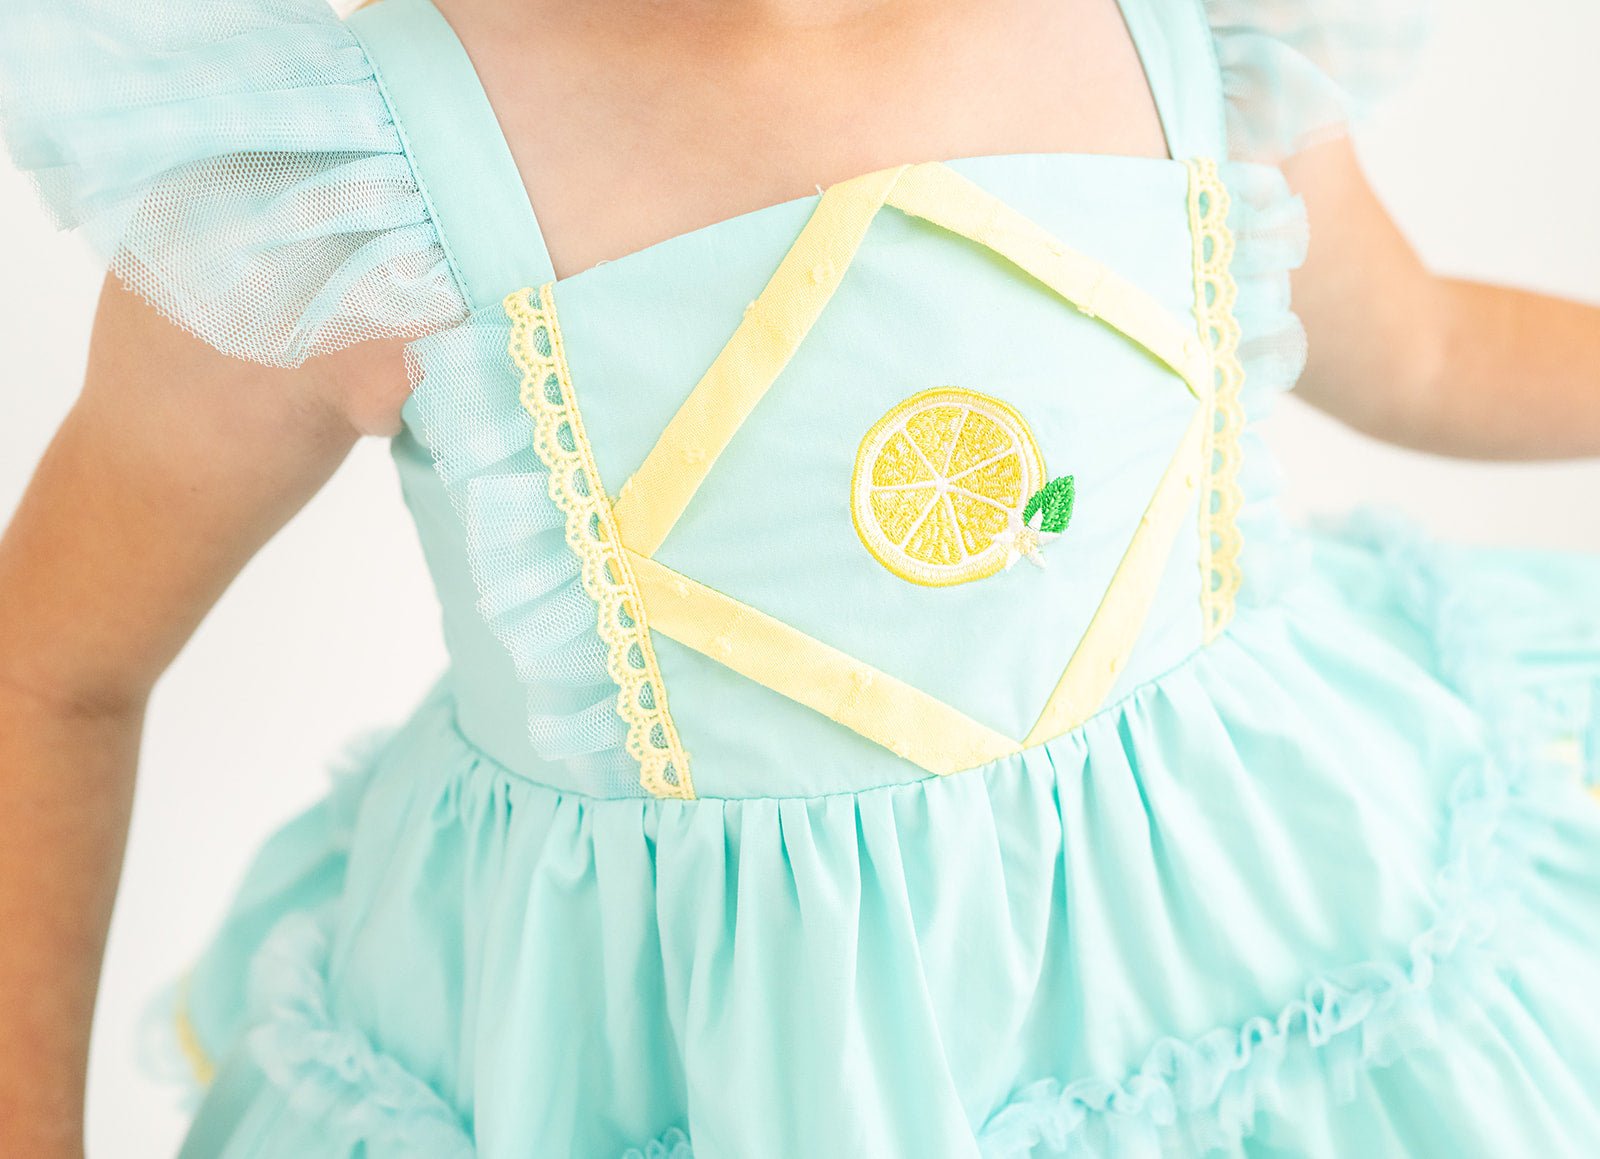 Make Lemonade Aqua and Lemon Yellow Embroidered Lace, Flutter Sleeve, and Tulle Accent Tunic Set - Evie's Closet Clothing